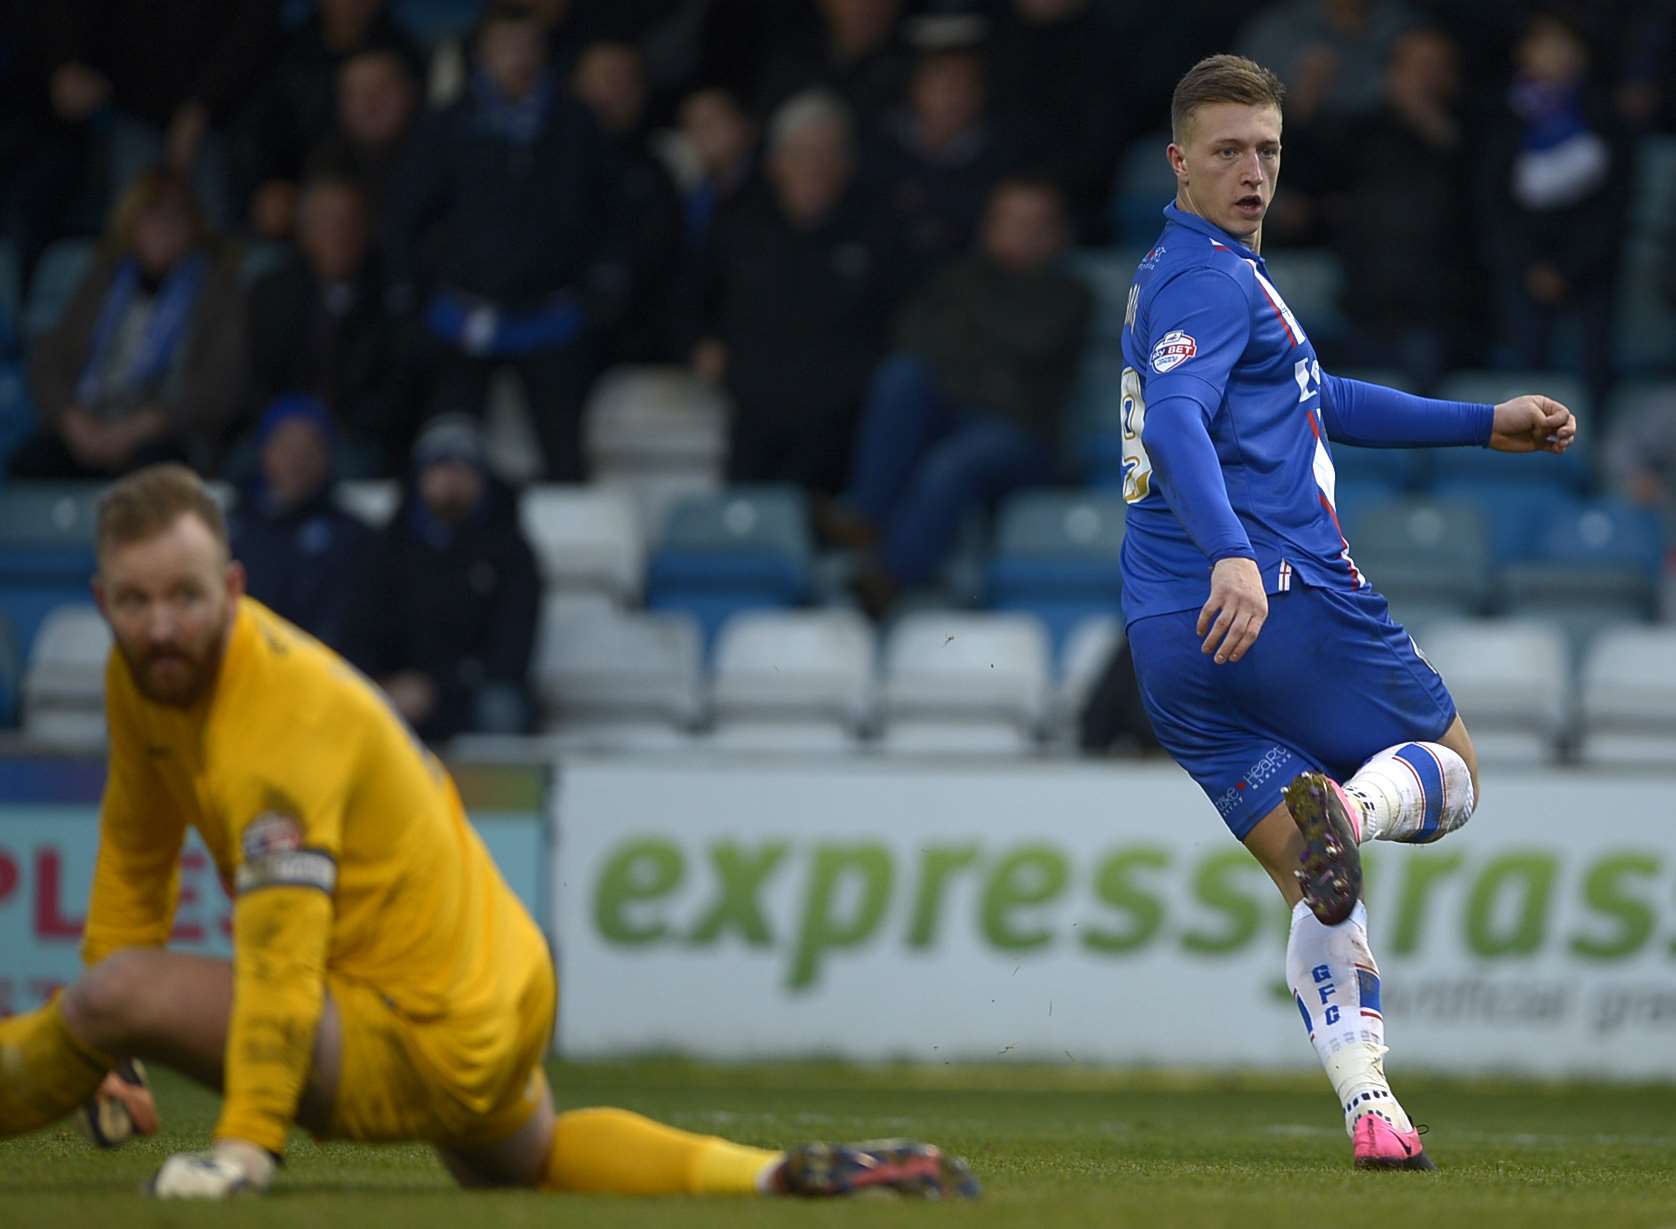 Luke Norris scores for Gills against Peterborough. Picture: Barry Goodwin